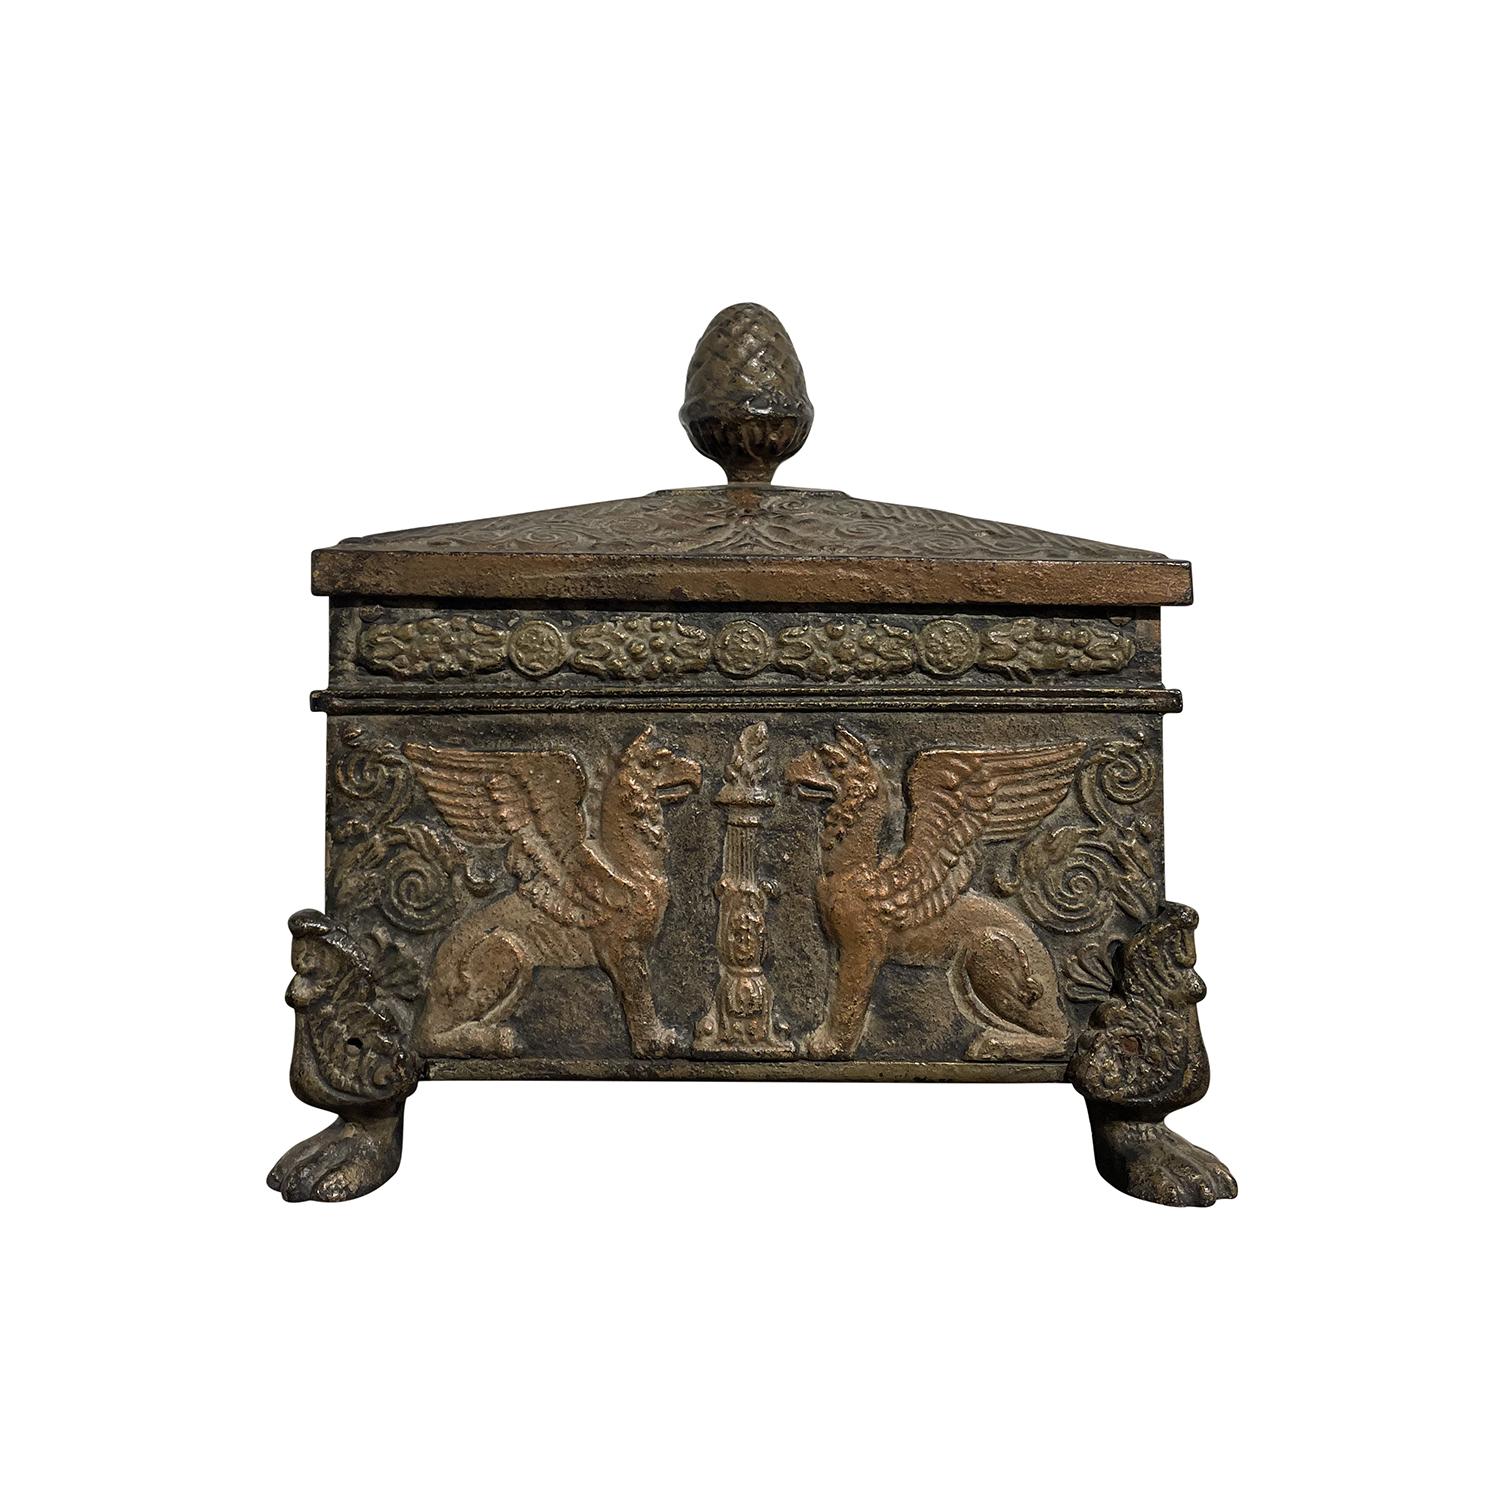 A dark-brown, black antique German coffer made of hand crafted iron, particularized with griffins, torchères and tendril motifs on the wall and pinecone mode on the lid, in good condition. The small detailed decor piece represents the Empire time